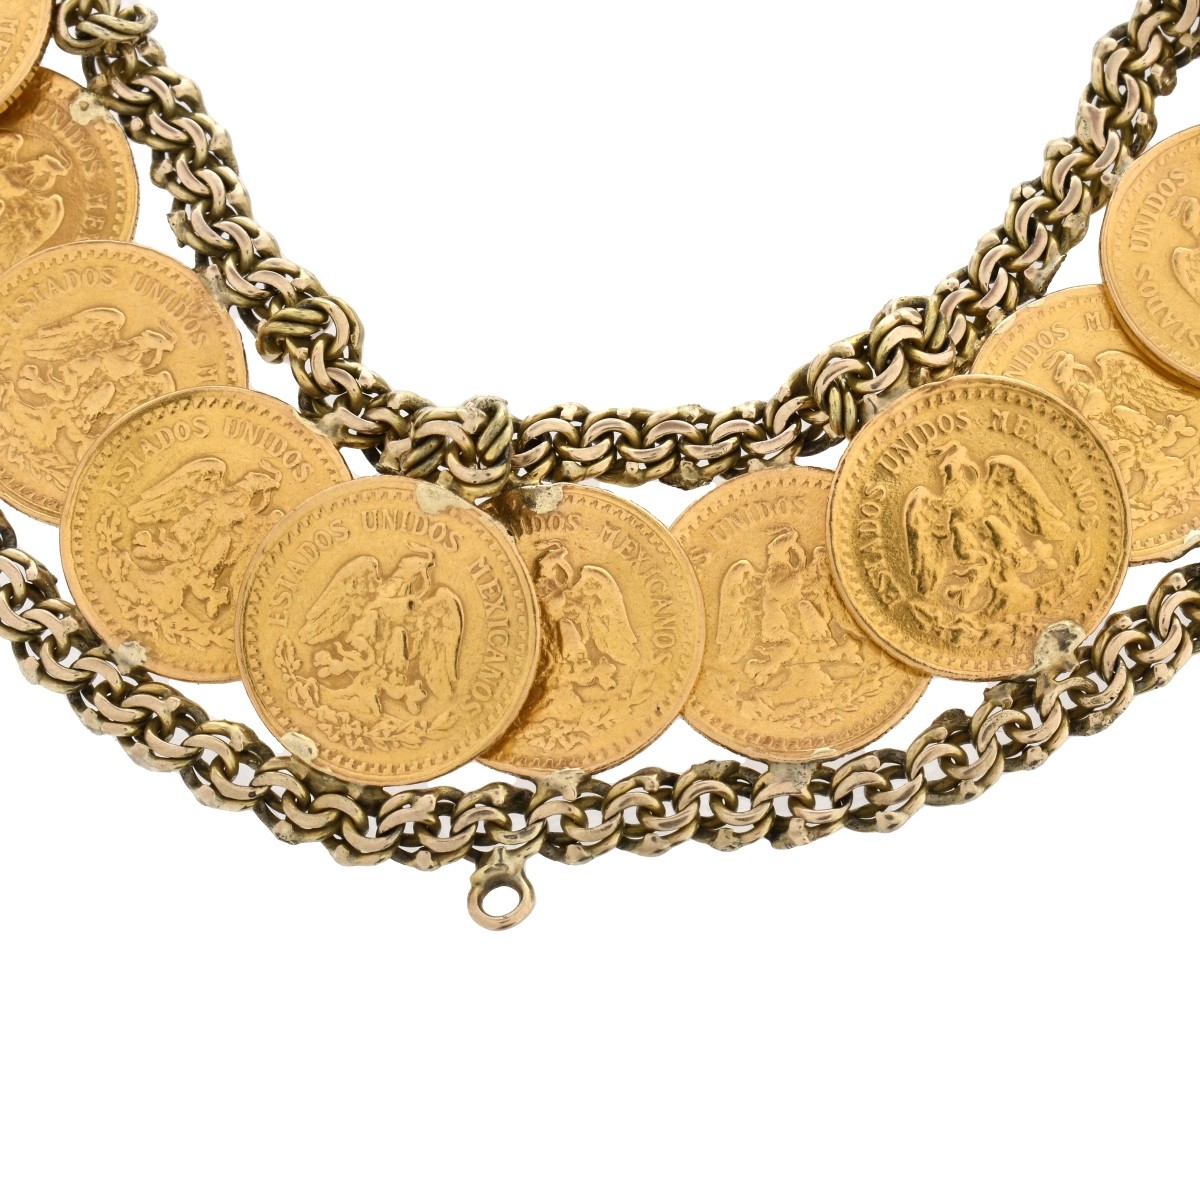 14K and Mexican Gold Coin Bracelet